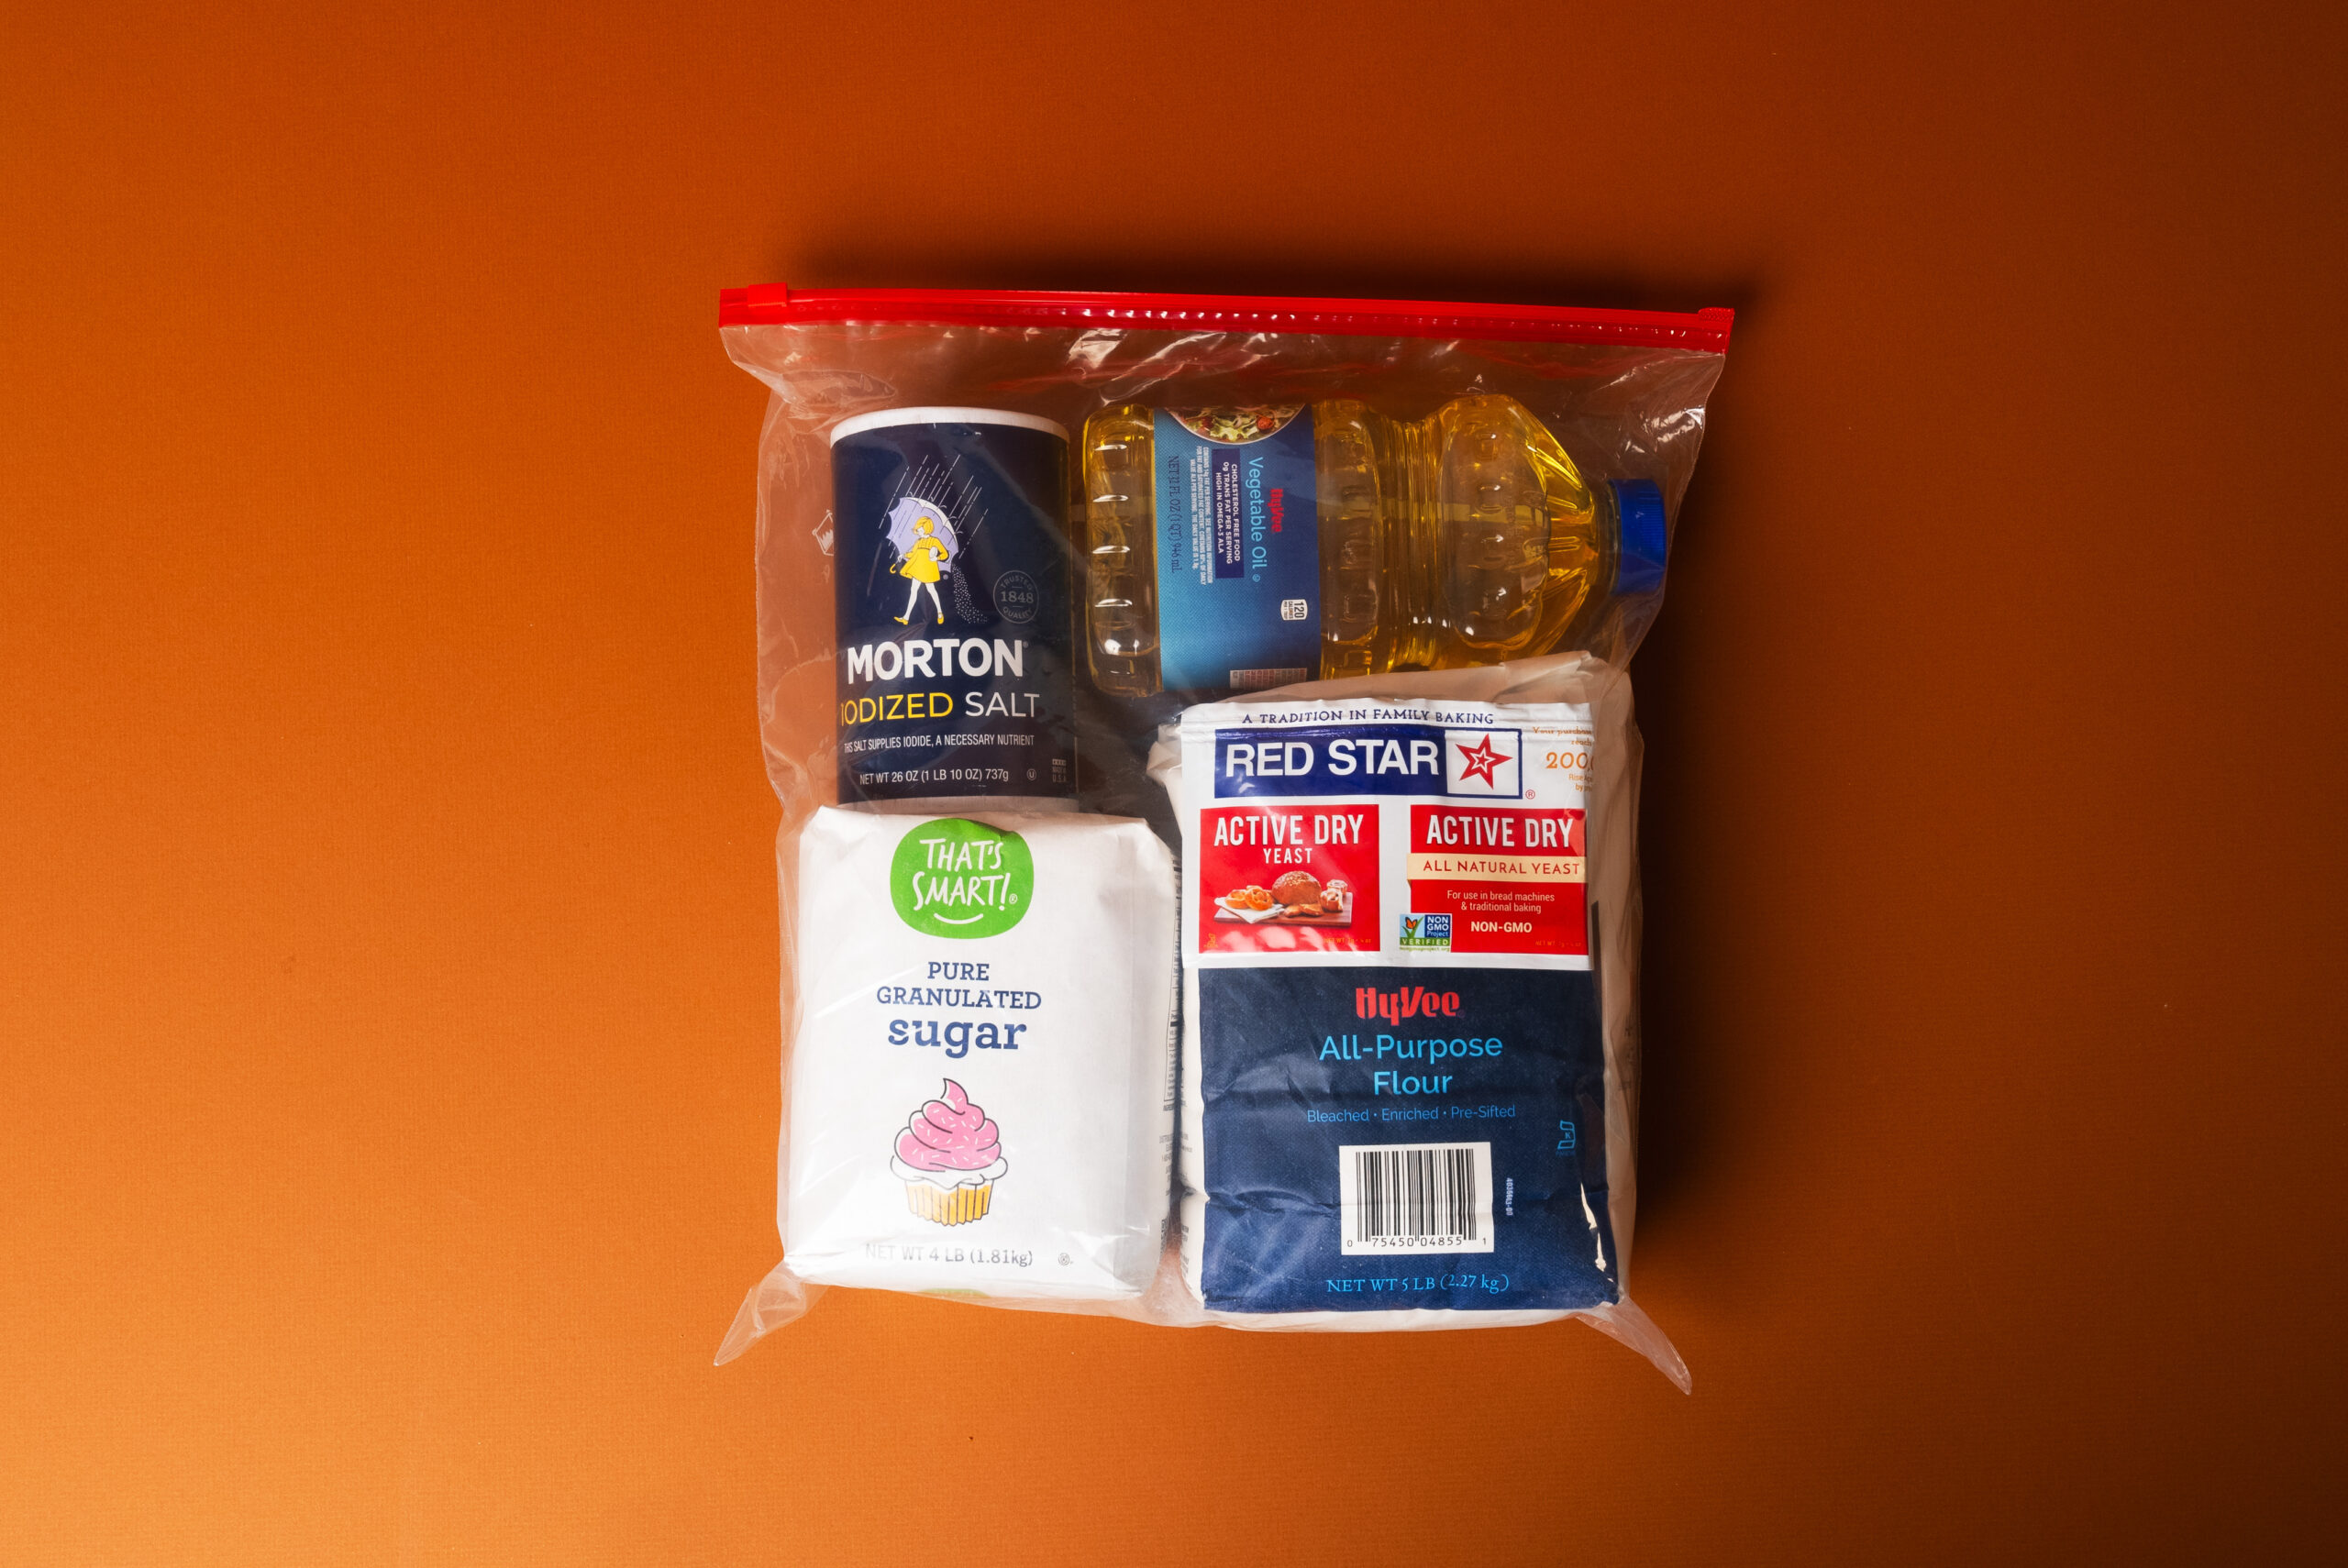 A Ziploc bag is filled with staple baking items